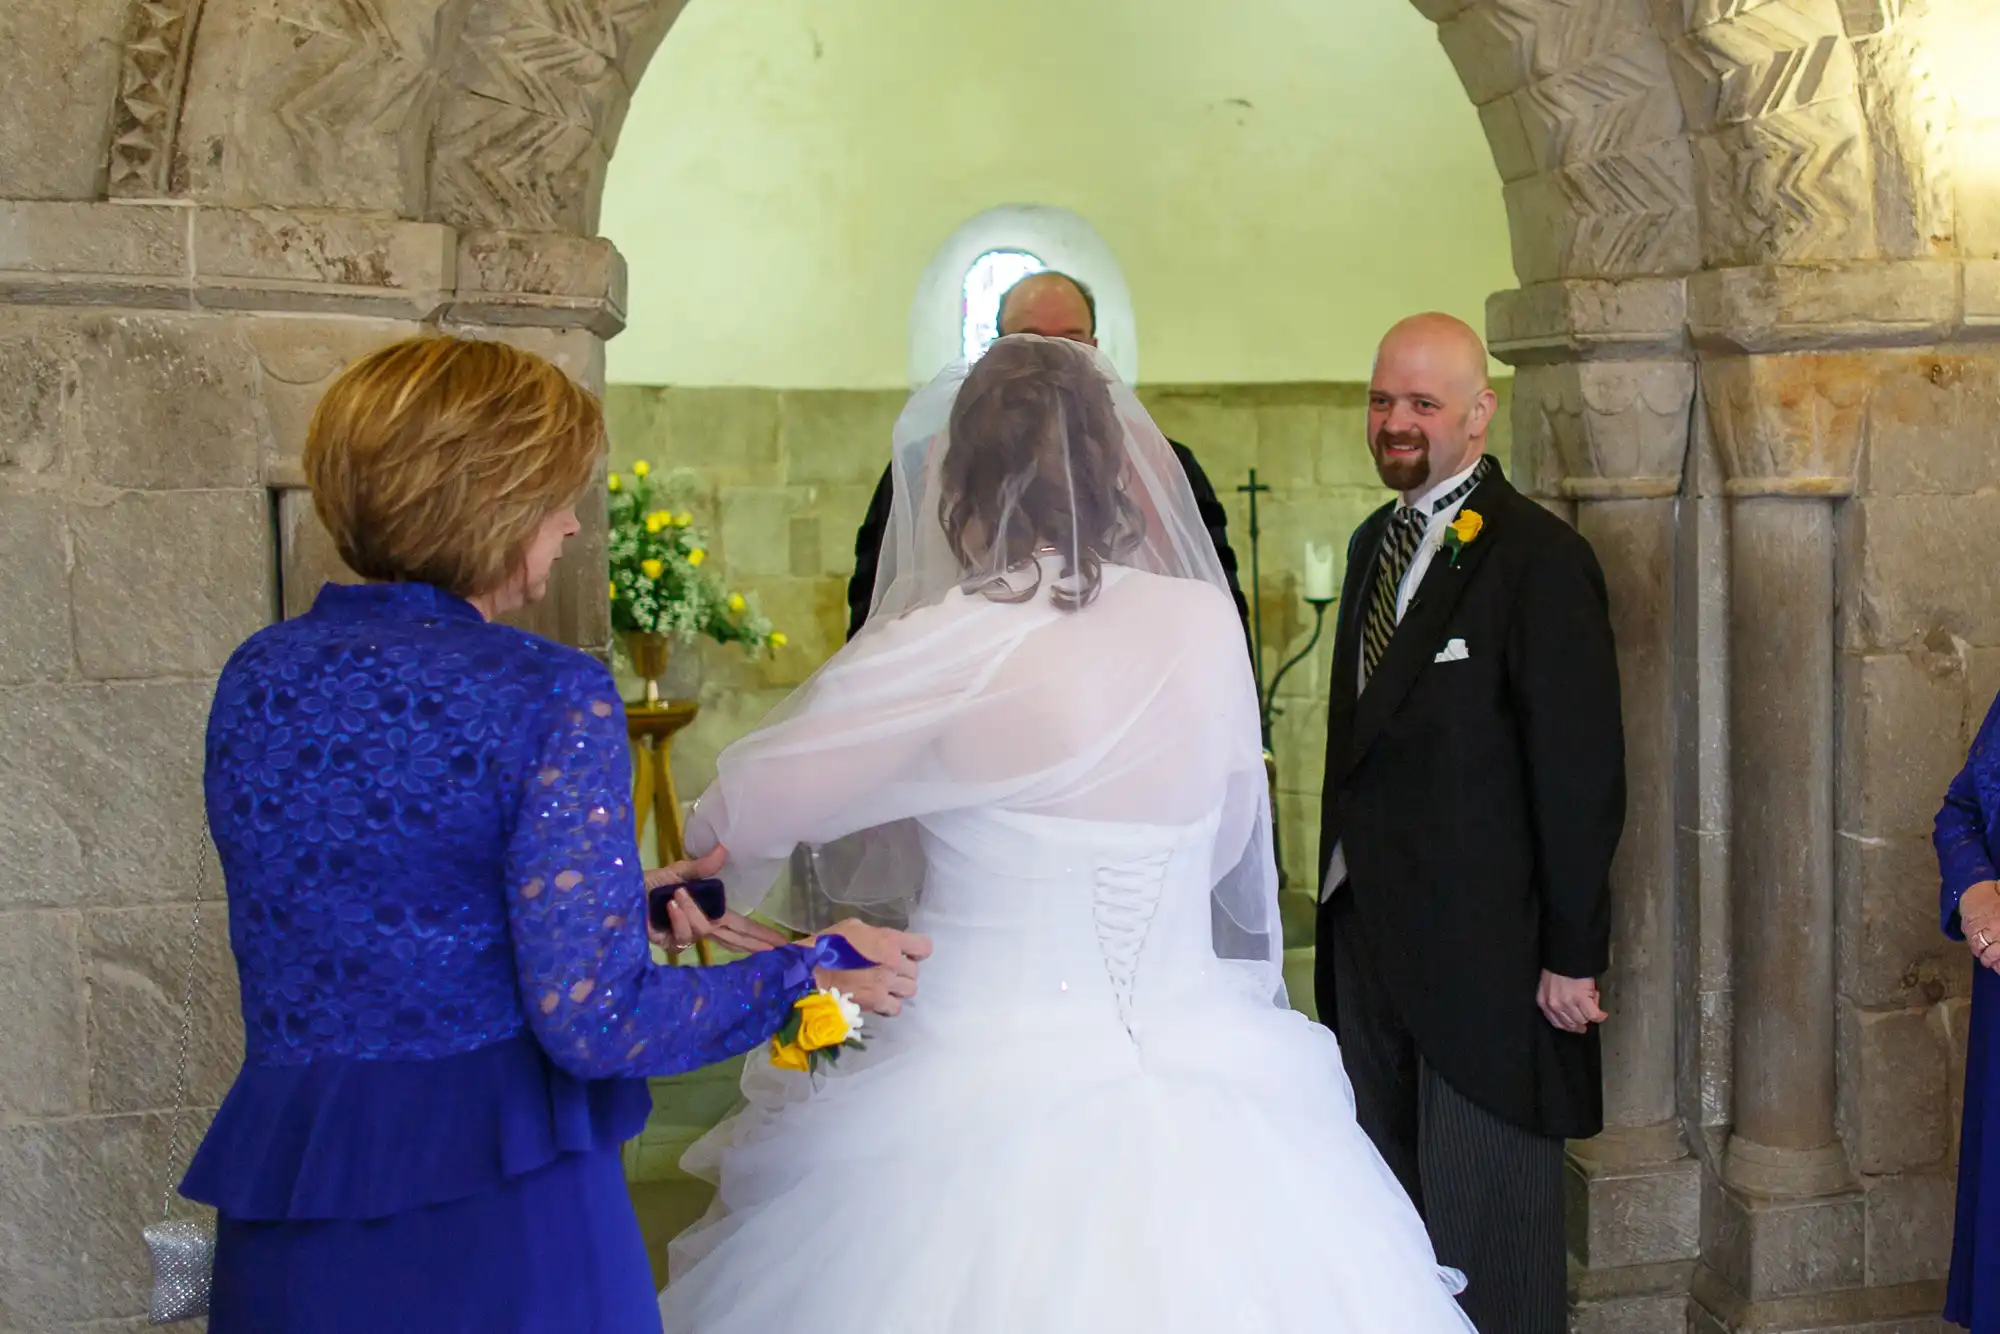 A bride in a white dress exchanges rings with her groom, who is smiling in a church ceremony.